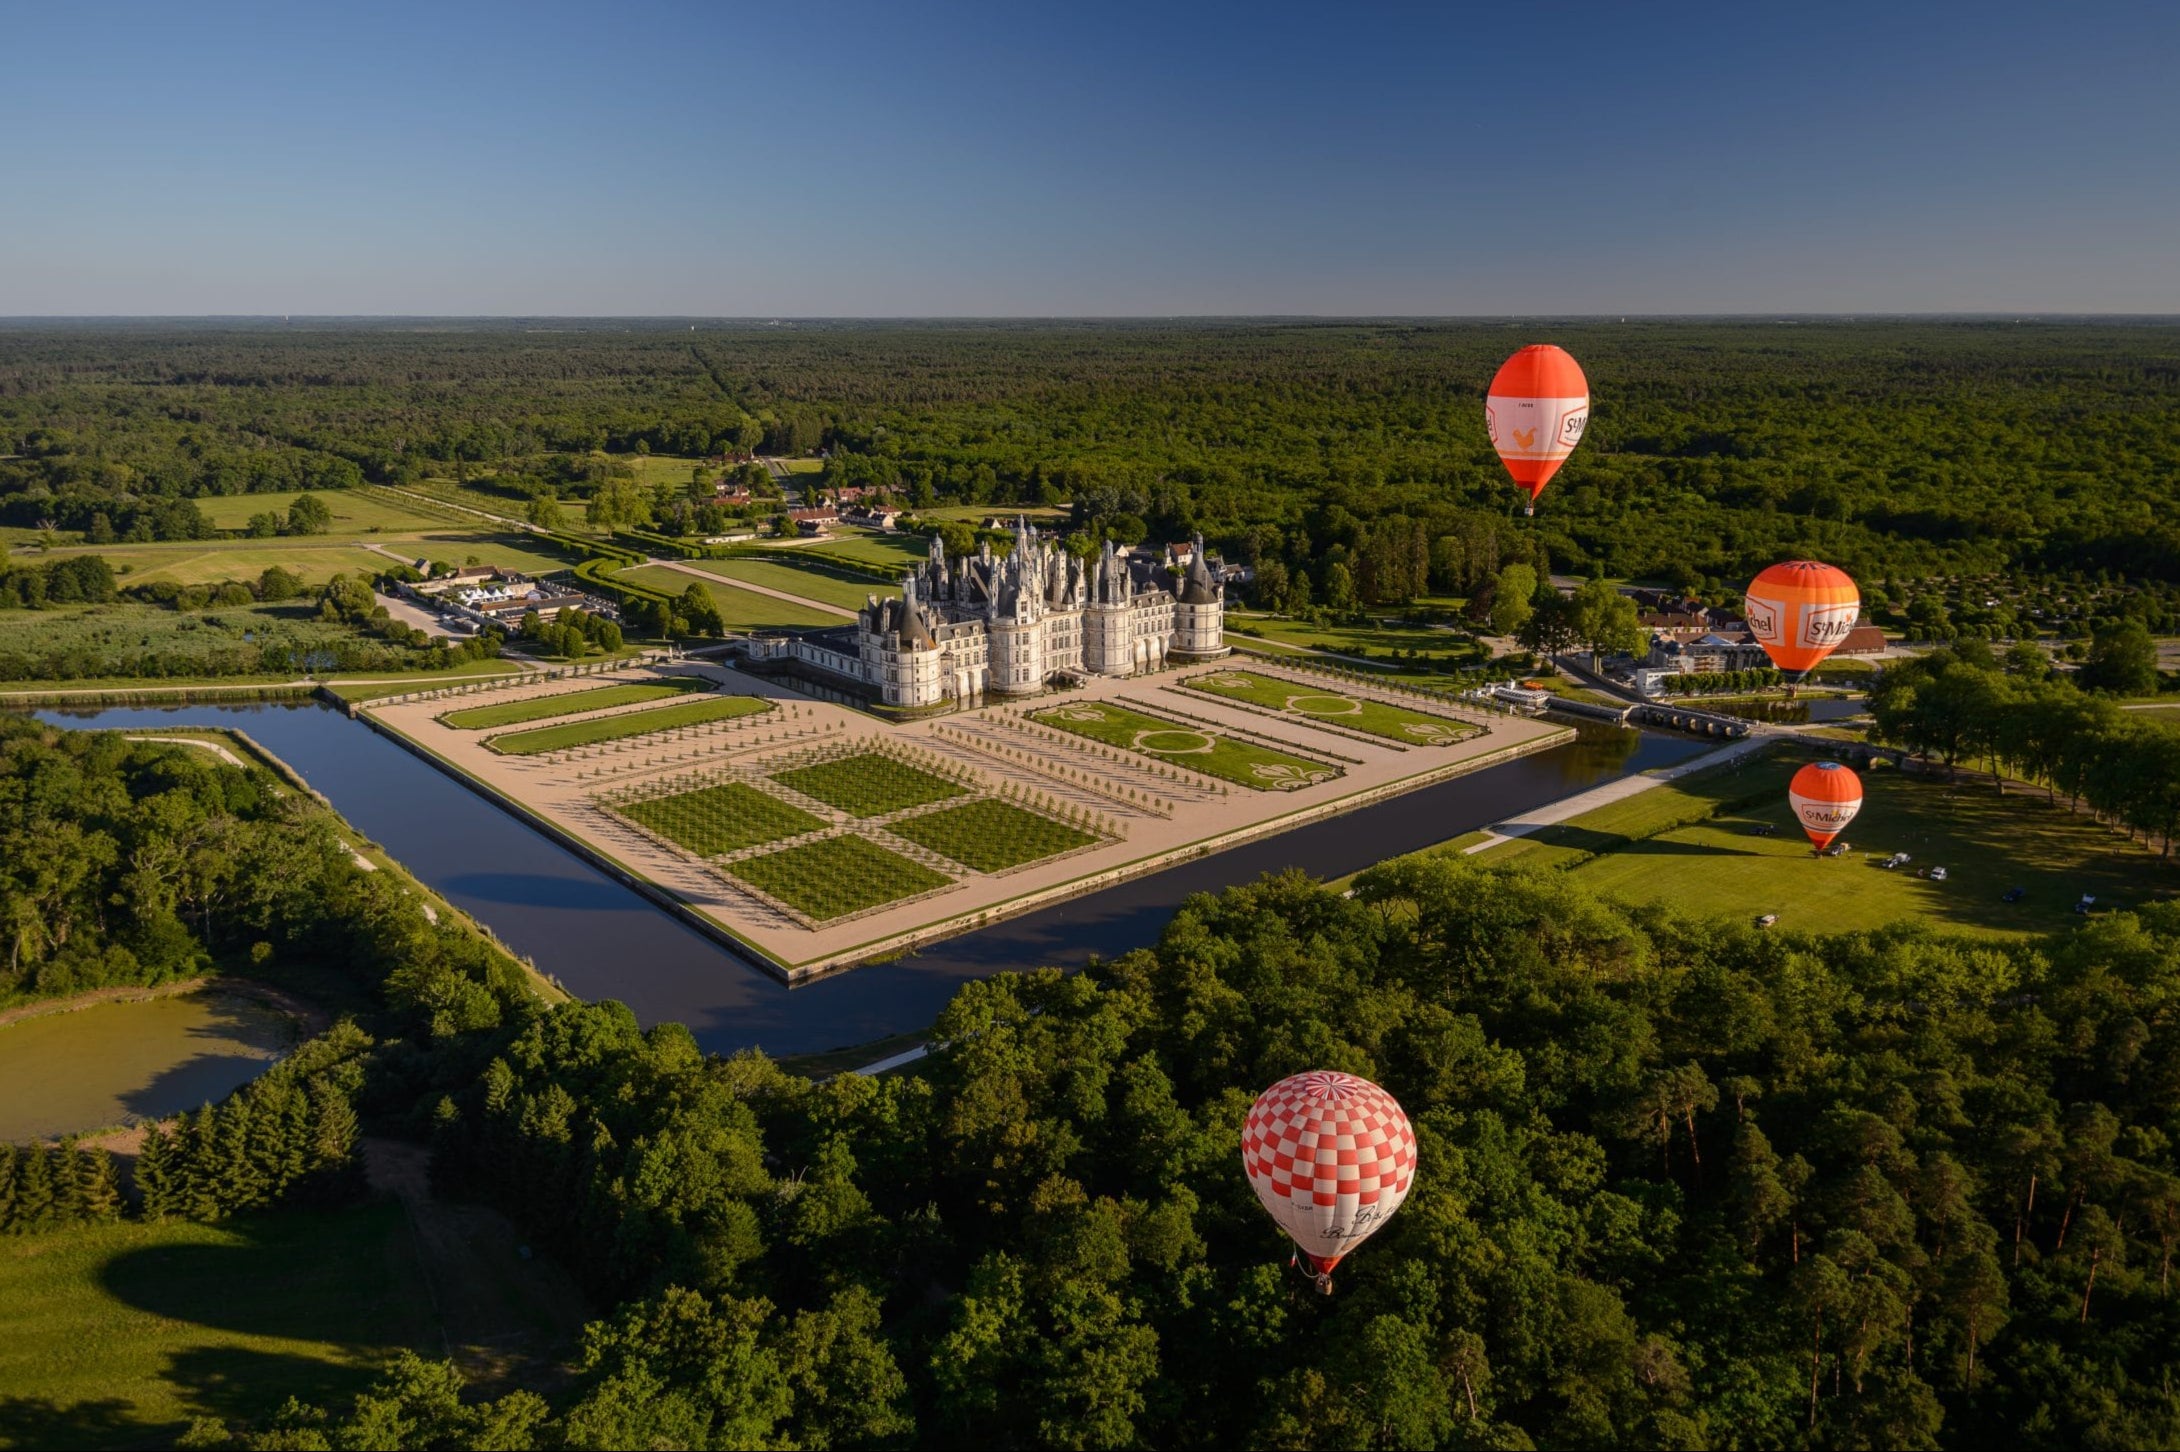 Chambord may be the best-known of Loire Valley chateaux